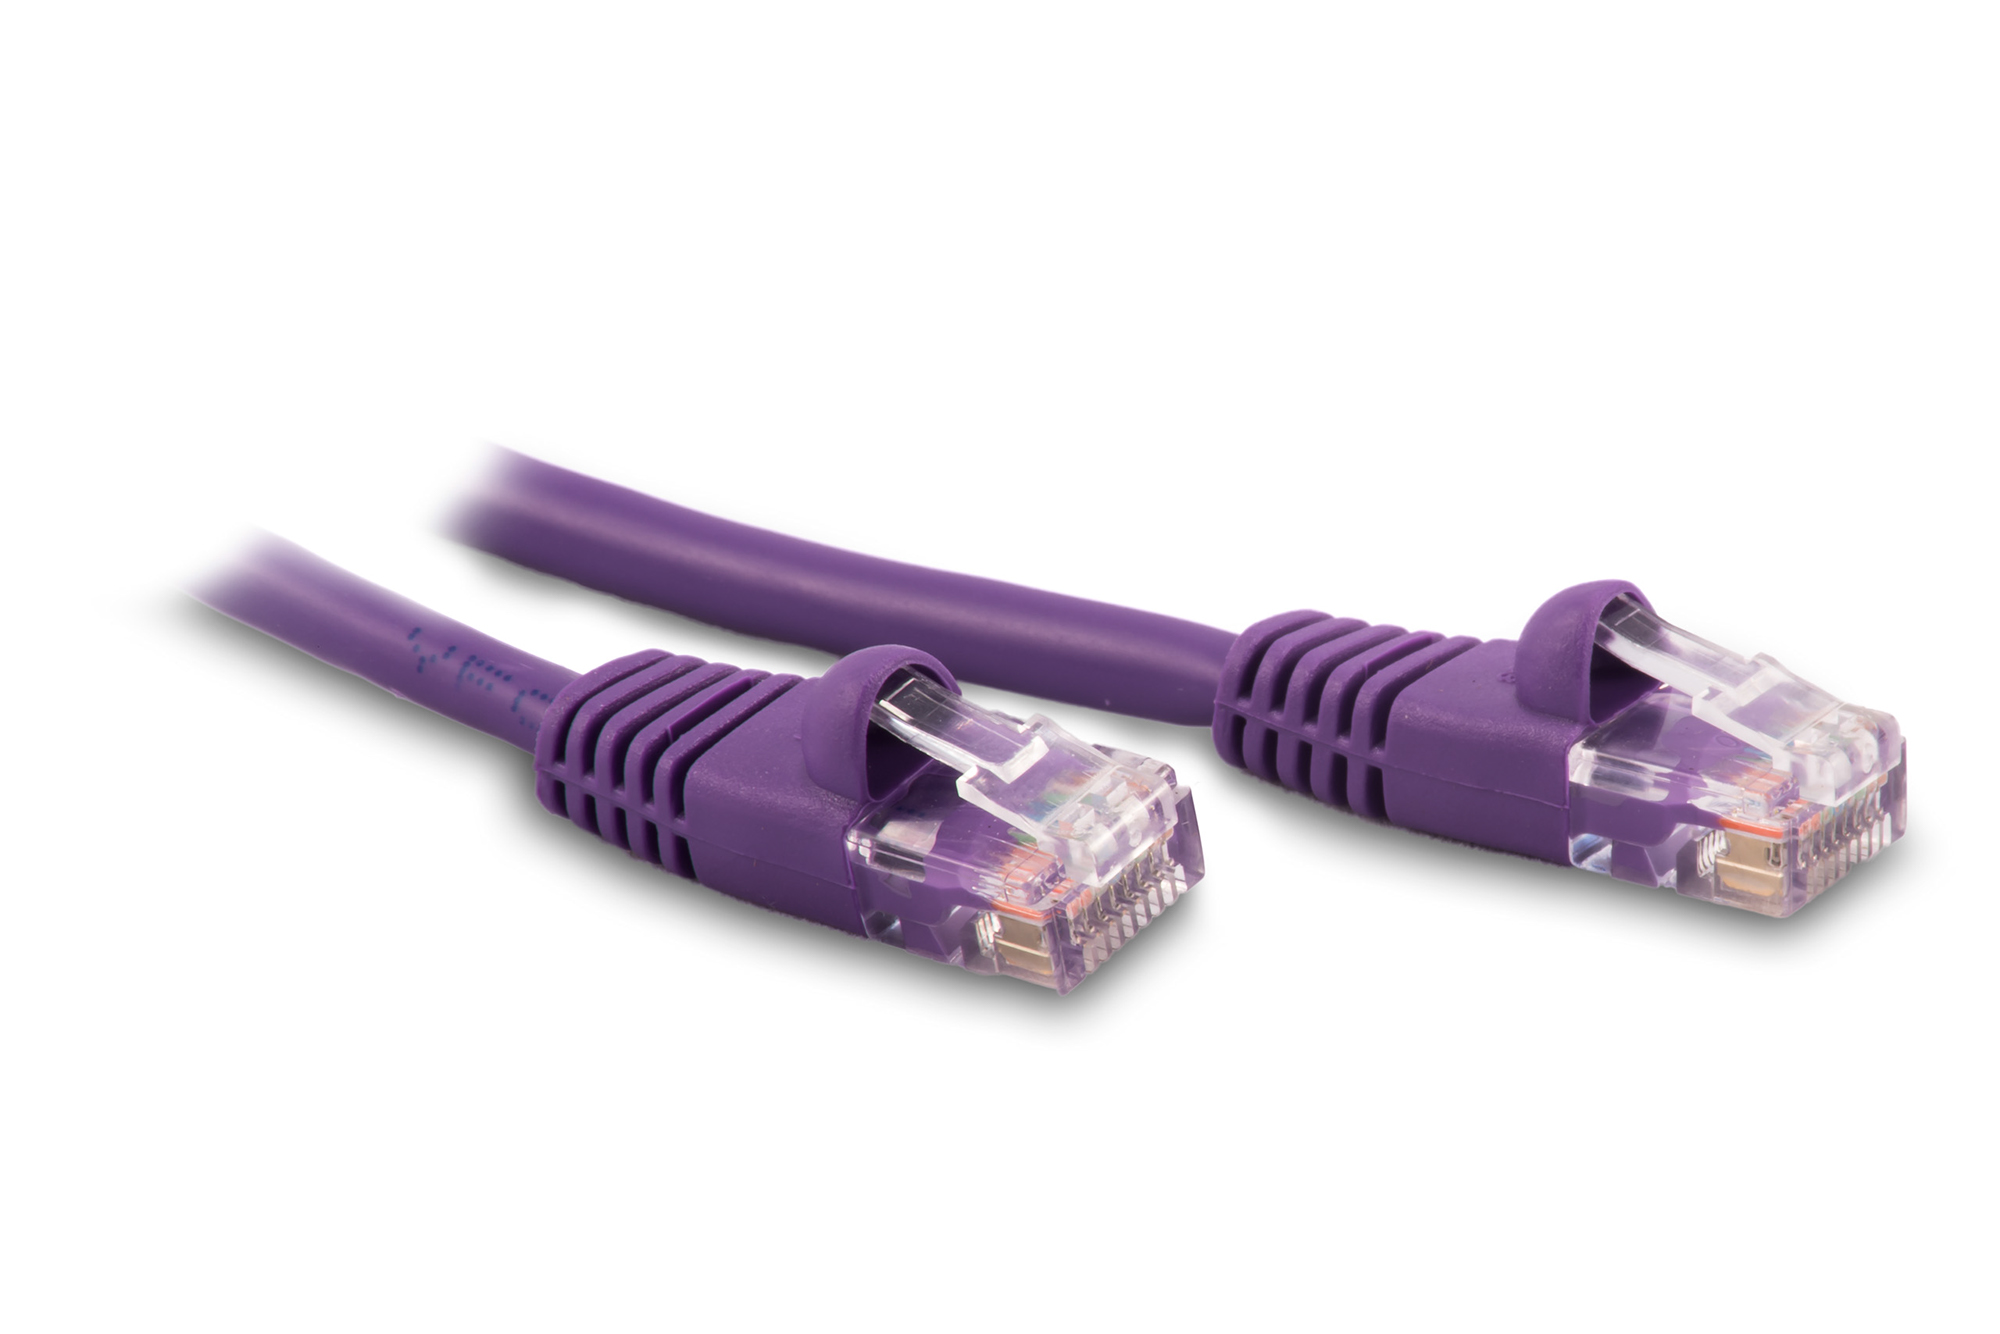 7ft Cat6 Ethernet Patch Cable - Violet Color - Snagless Boot